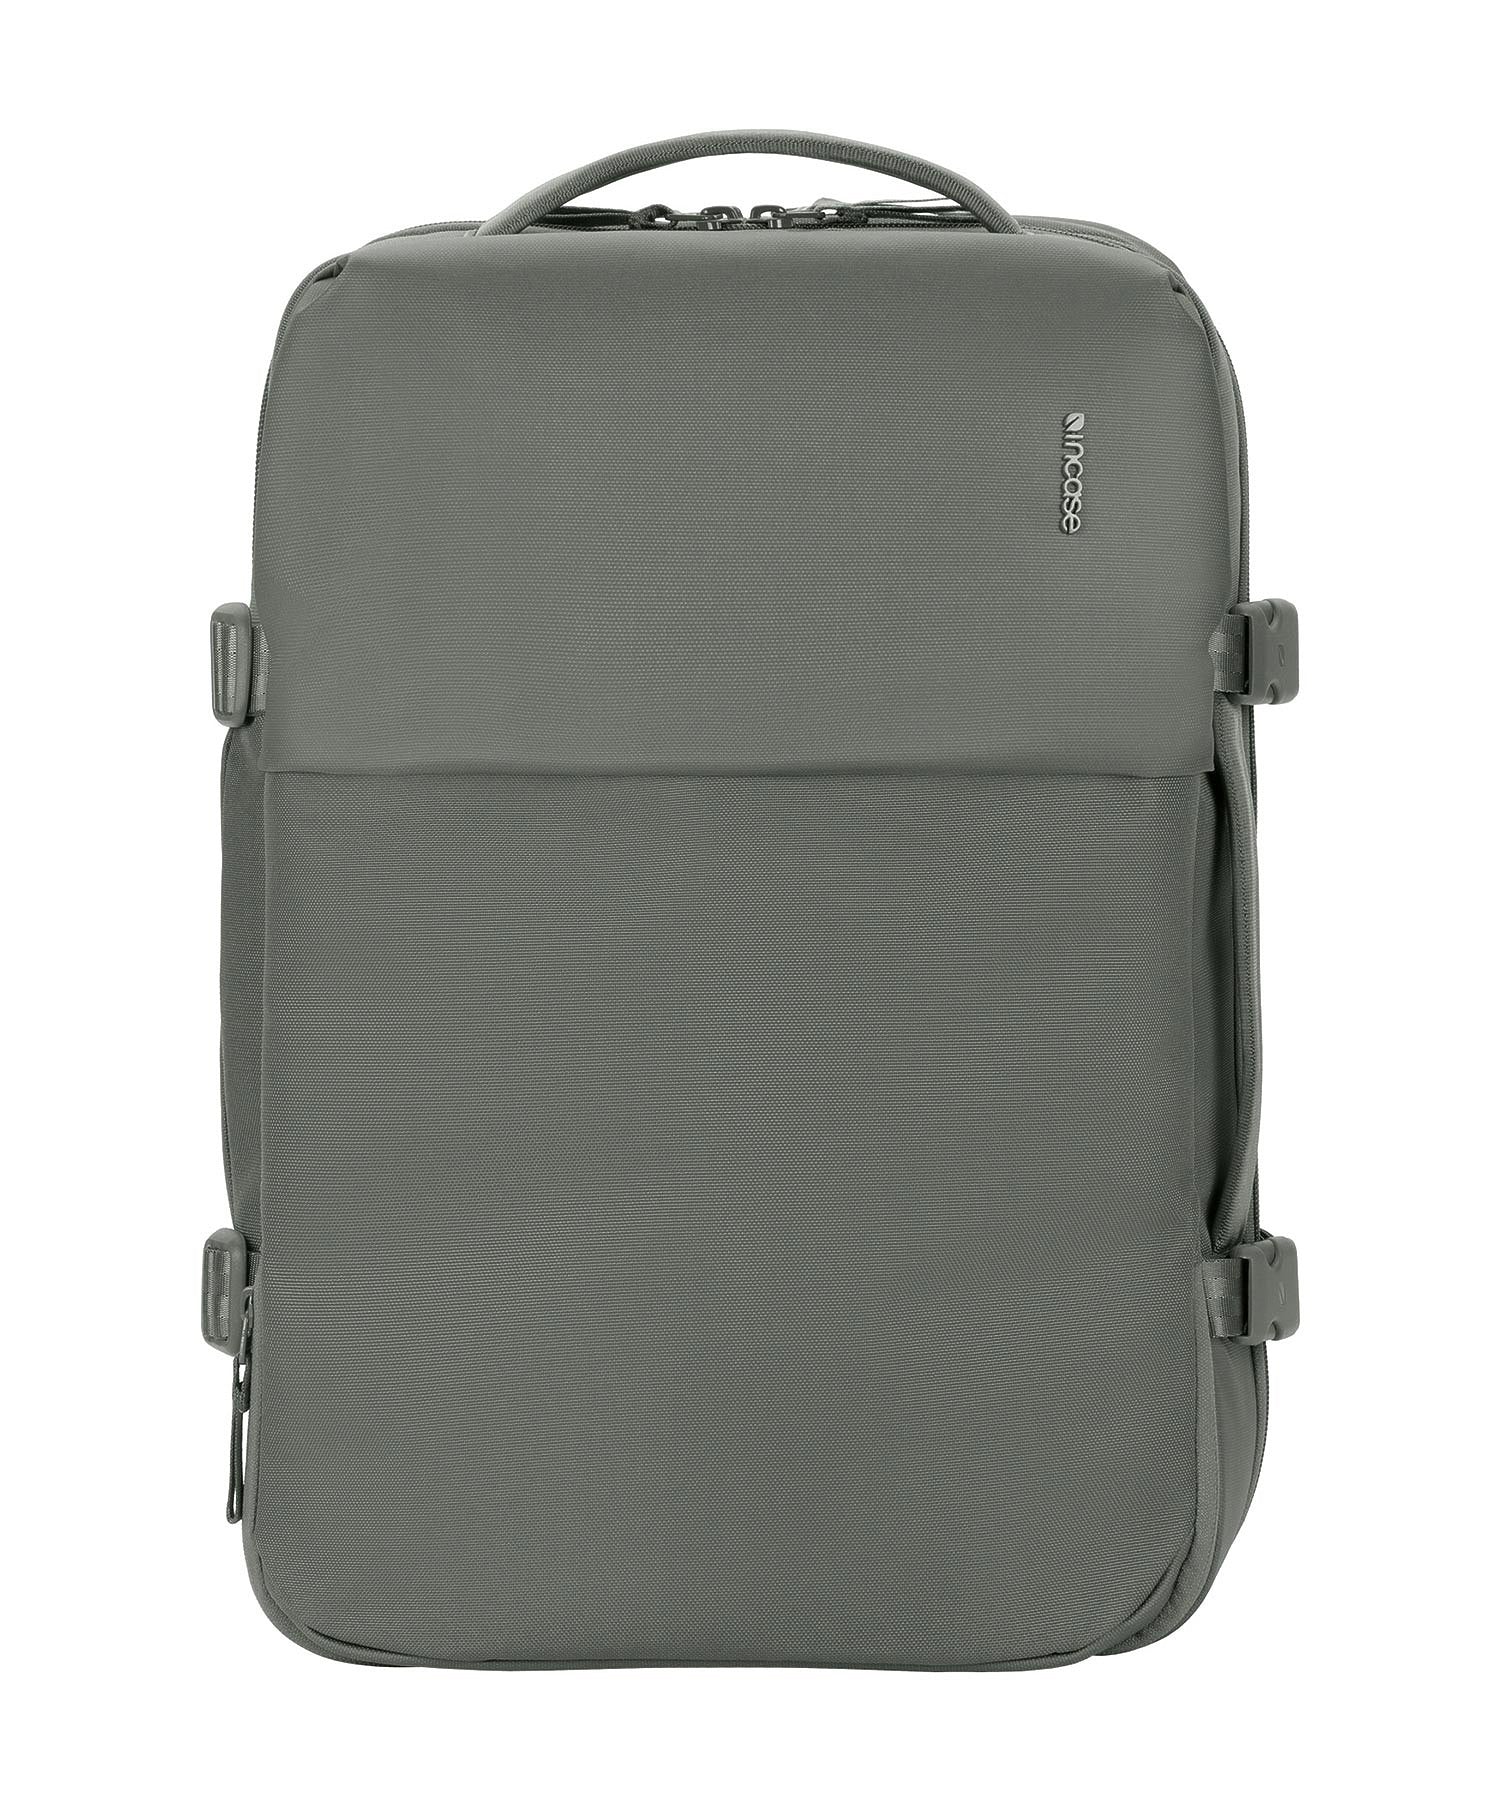 INCO100682-SIV Incase A R C Travel Pack - Smoked Ivy